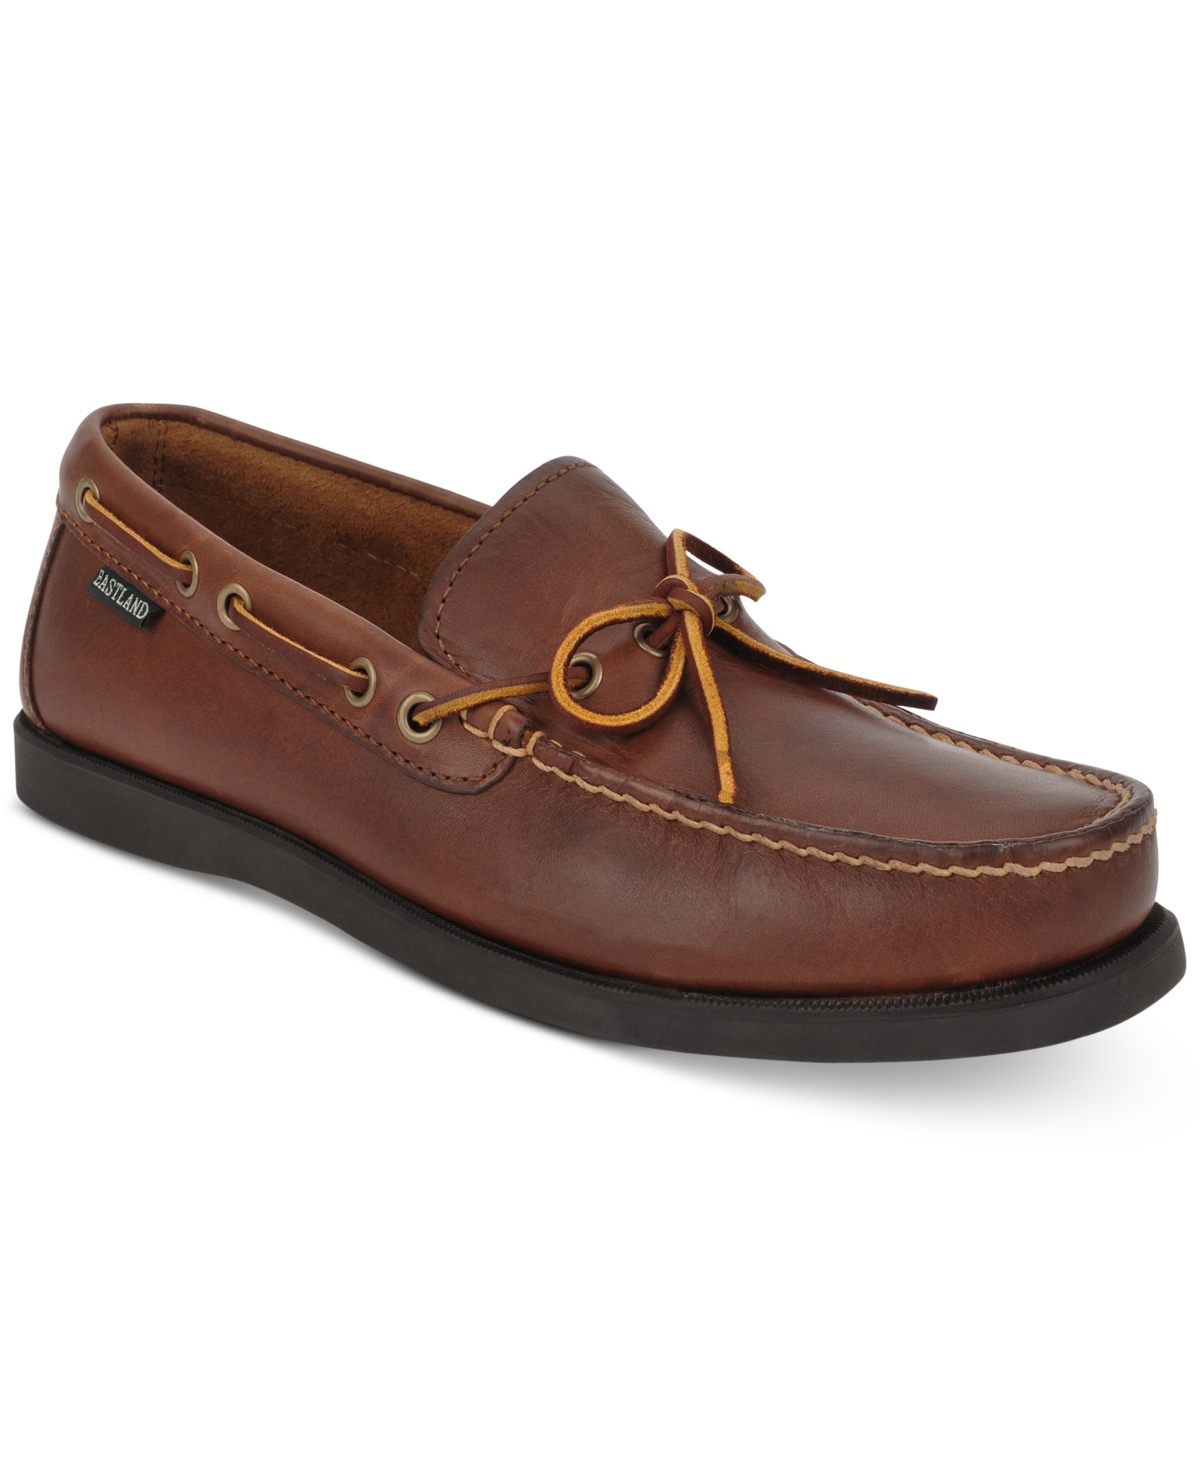 Men's Yarmouth Boat Shoes - Bomber Brn